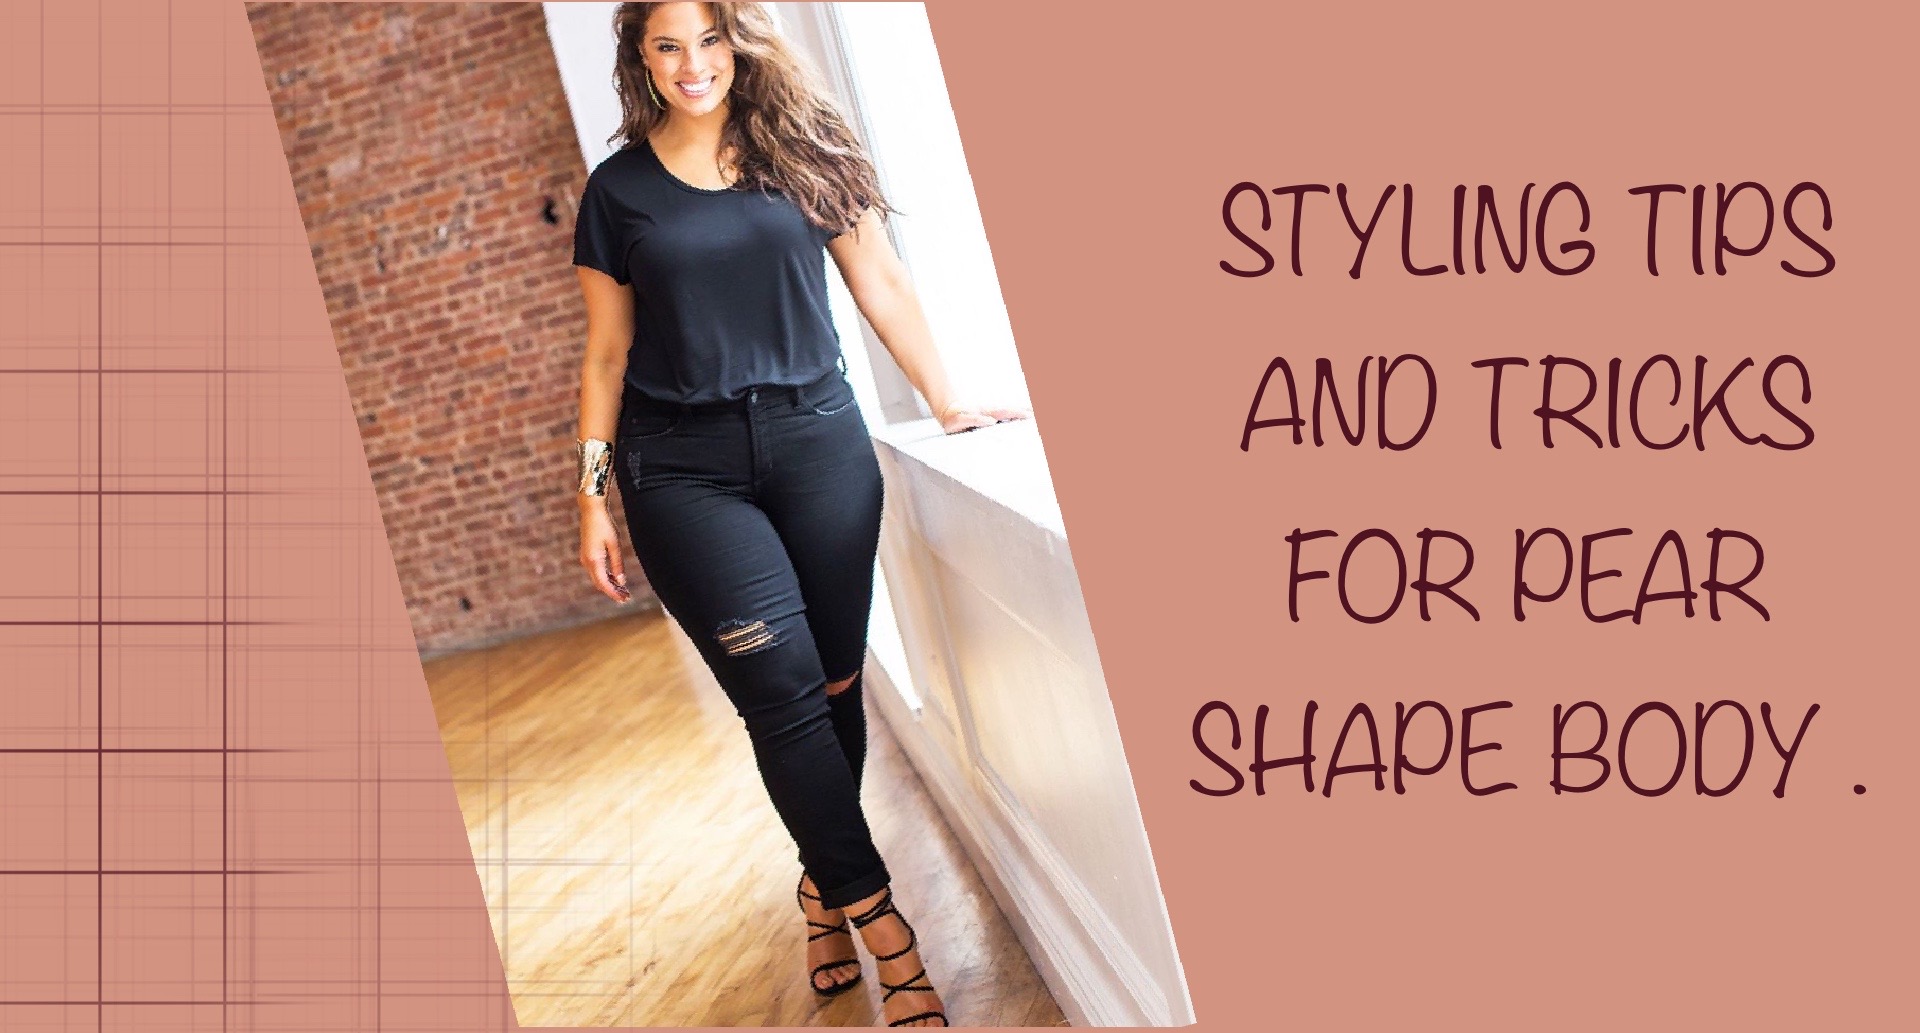 10 Fashion Tips for Pear Shaped Women